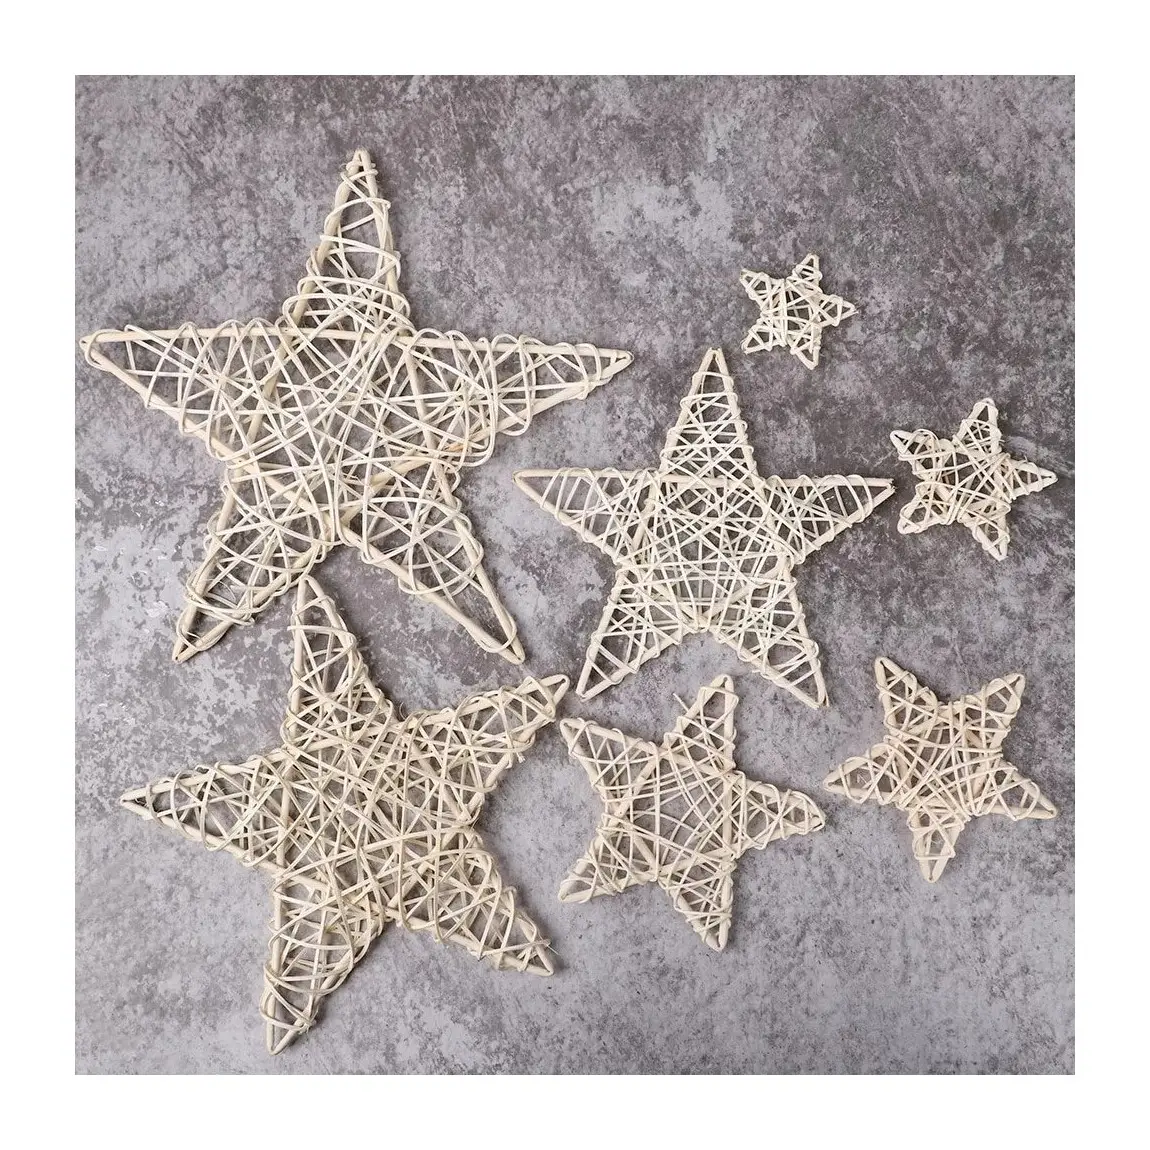 Wholesale christmas led light decoration rattan decorative star shaped lights made in Vietnam ready to ship